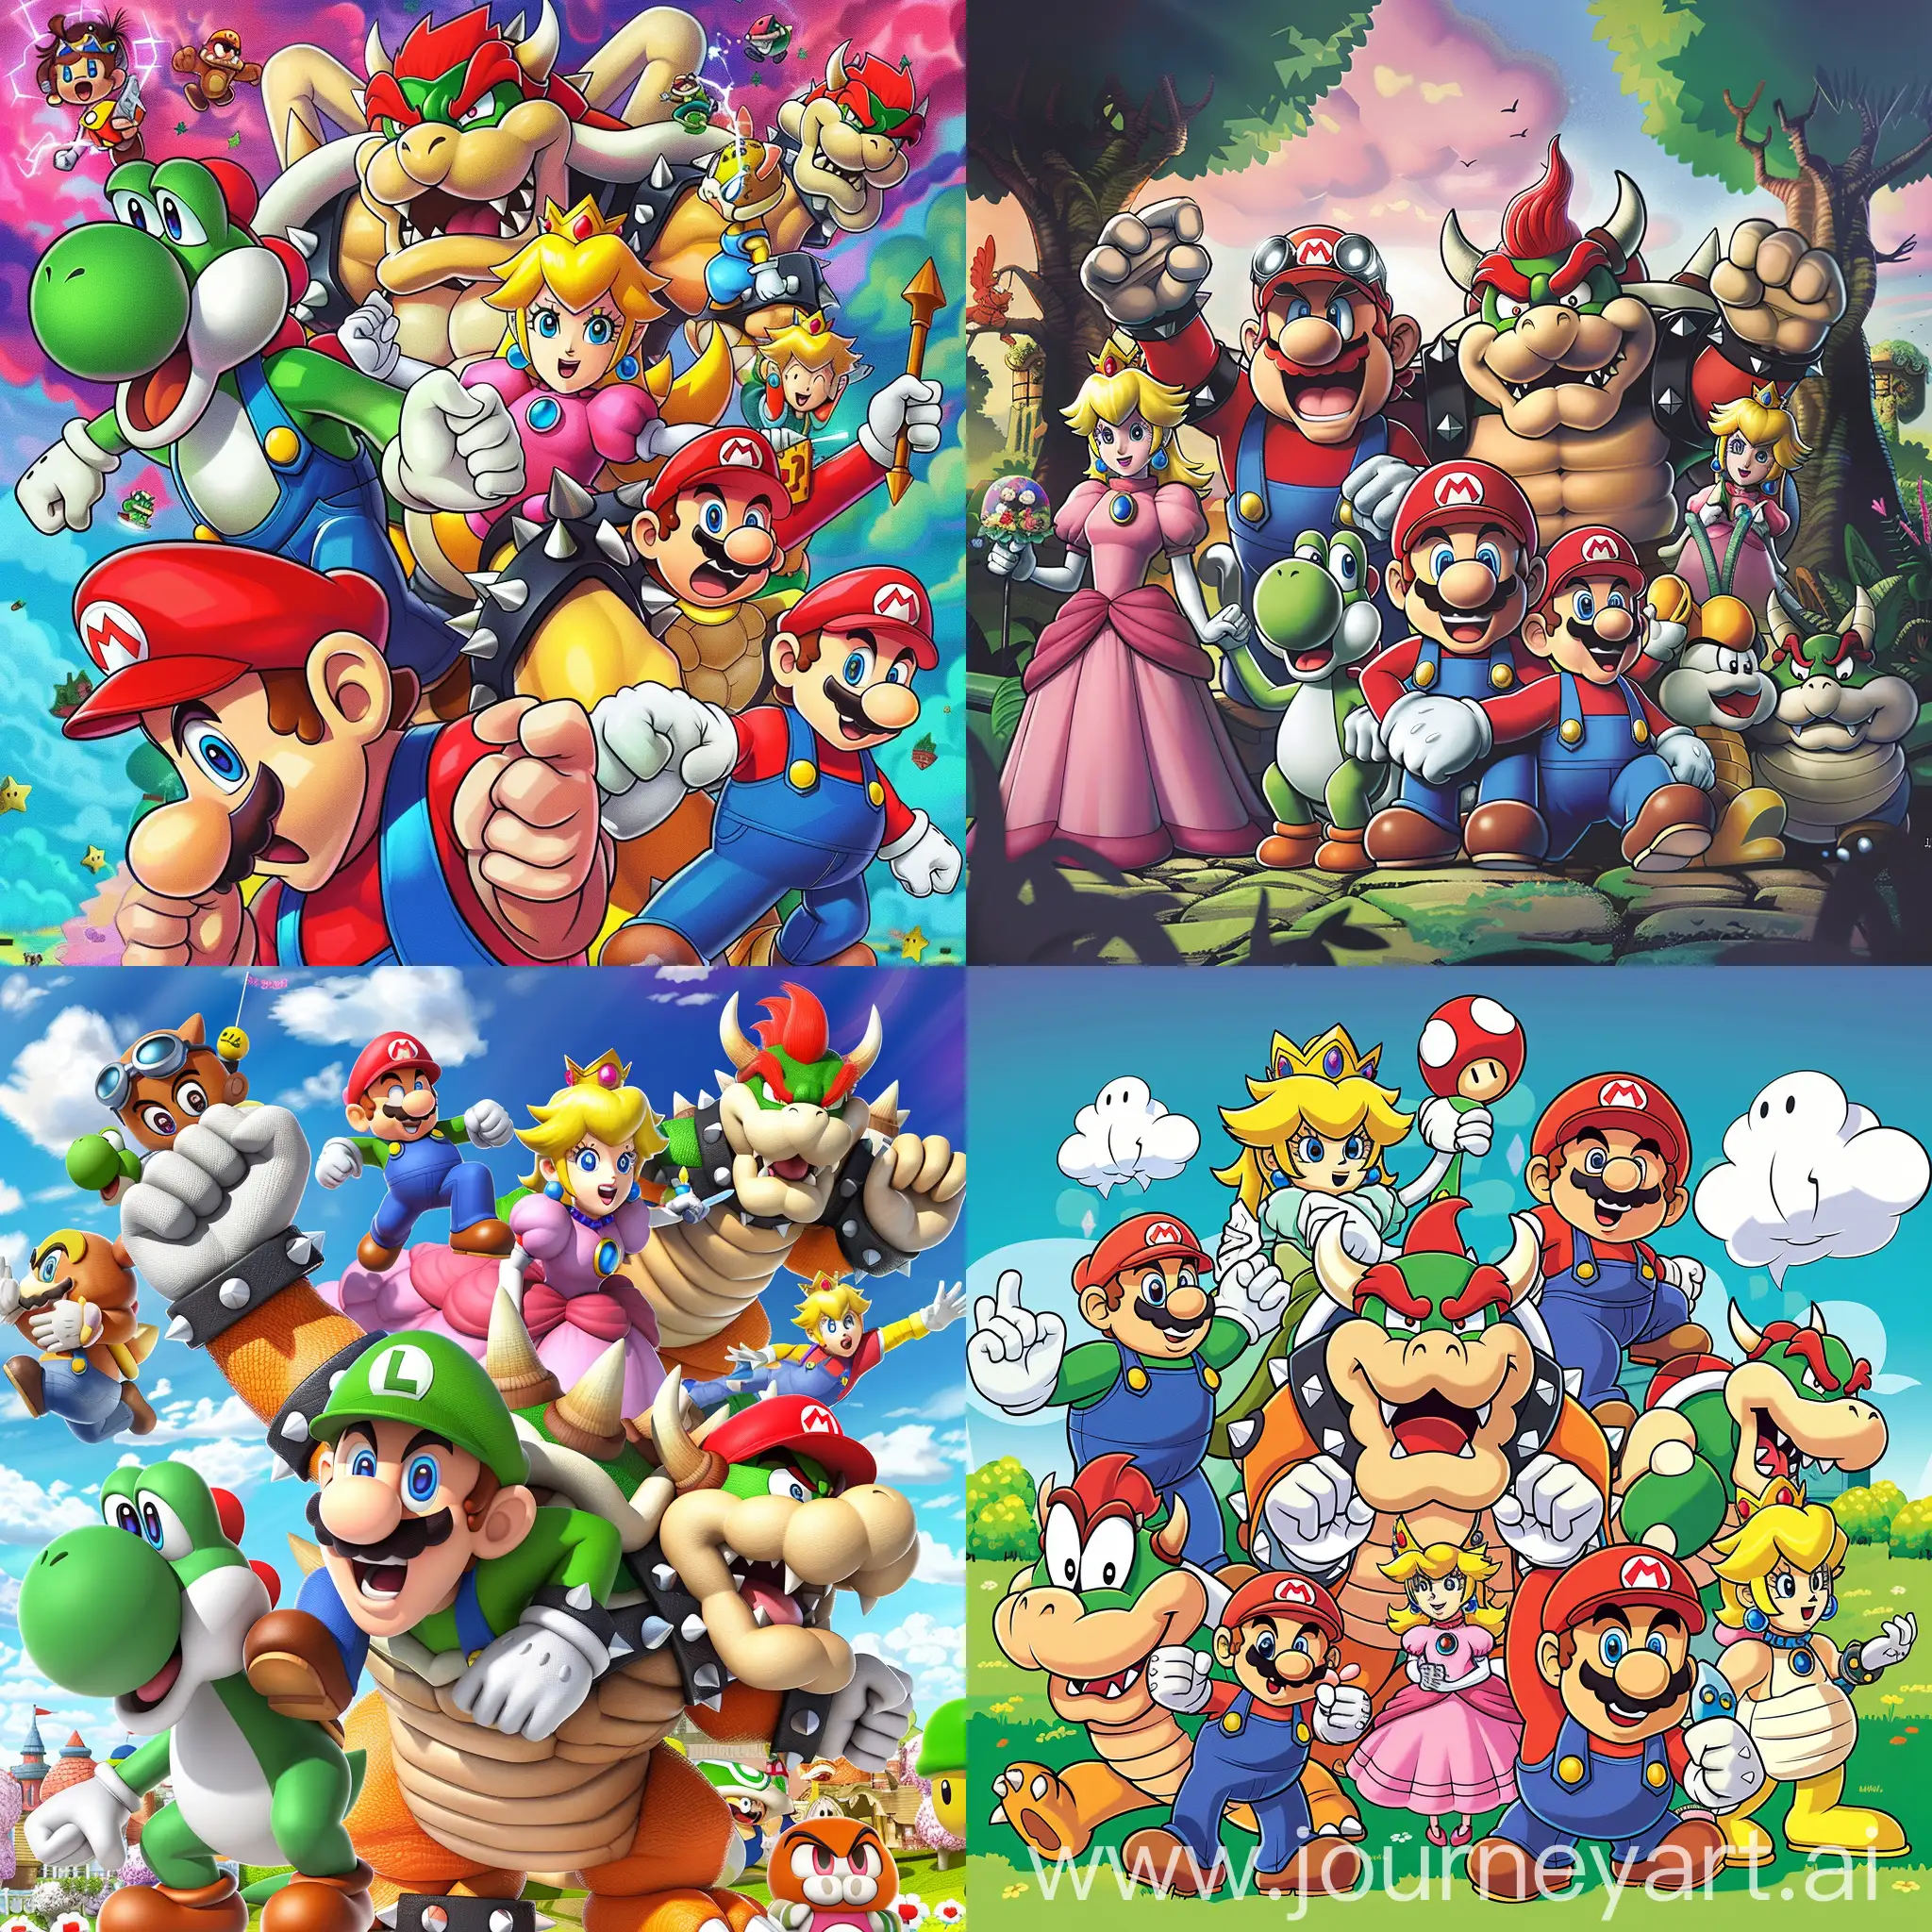 Joyful-Gathering-of-Mario-Bros-Characters-with-Princess-Peach-and-Bowser-Jr-on-Colorful-Background